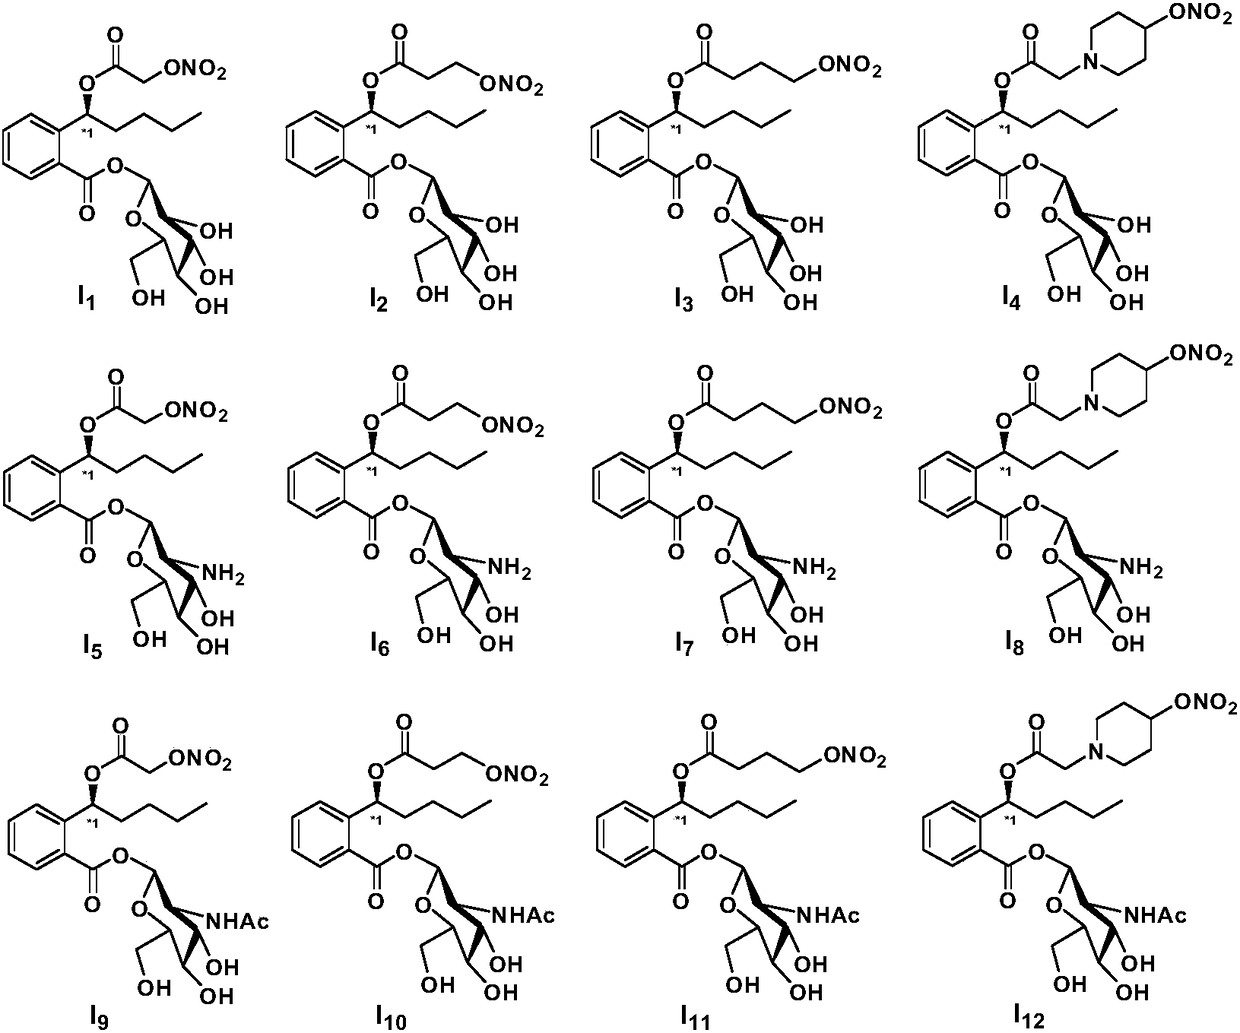 Preparation method and pharmaceutical applications of glycosyl modified butylphthalide ring-opened derivatives